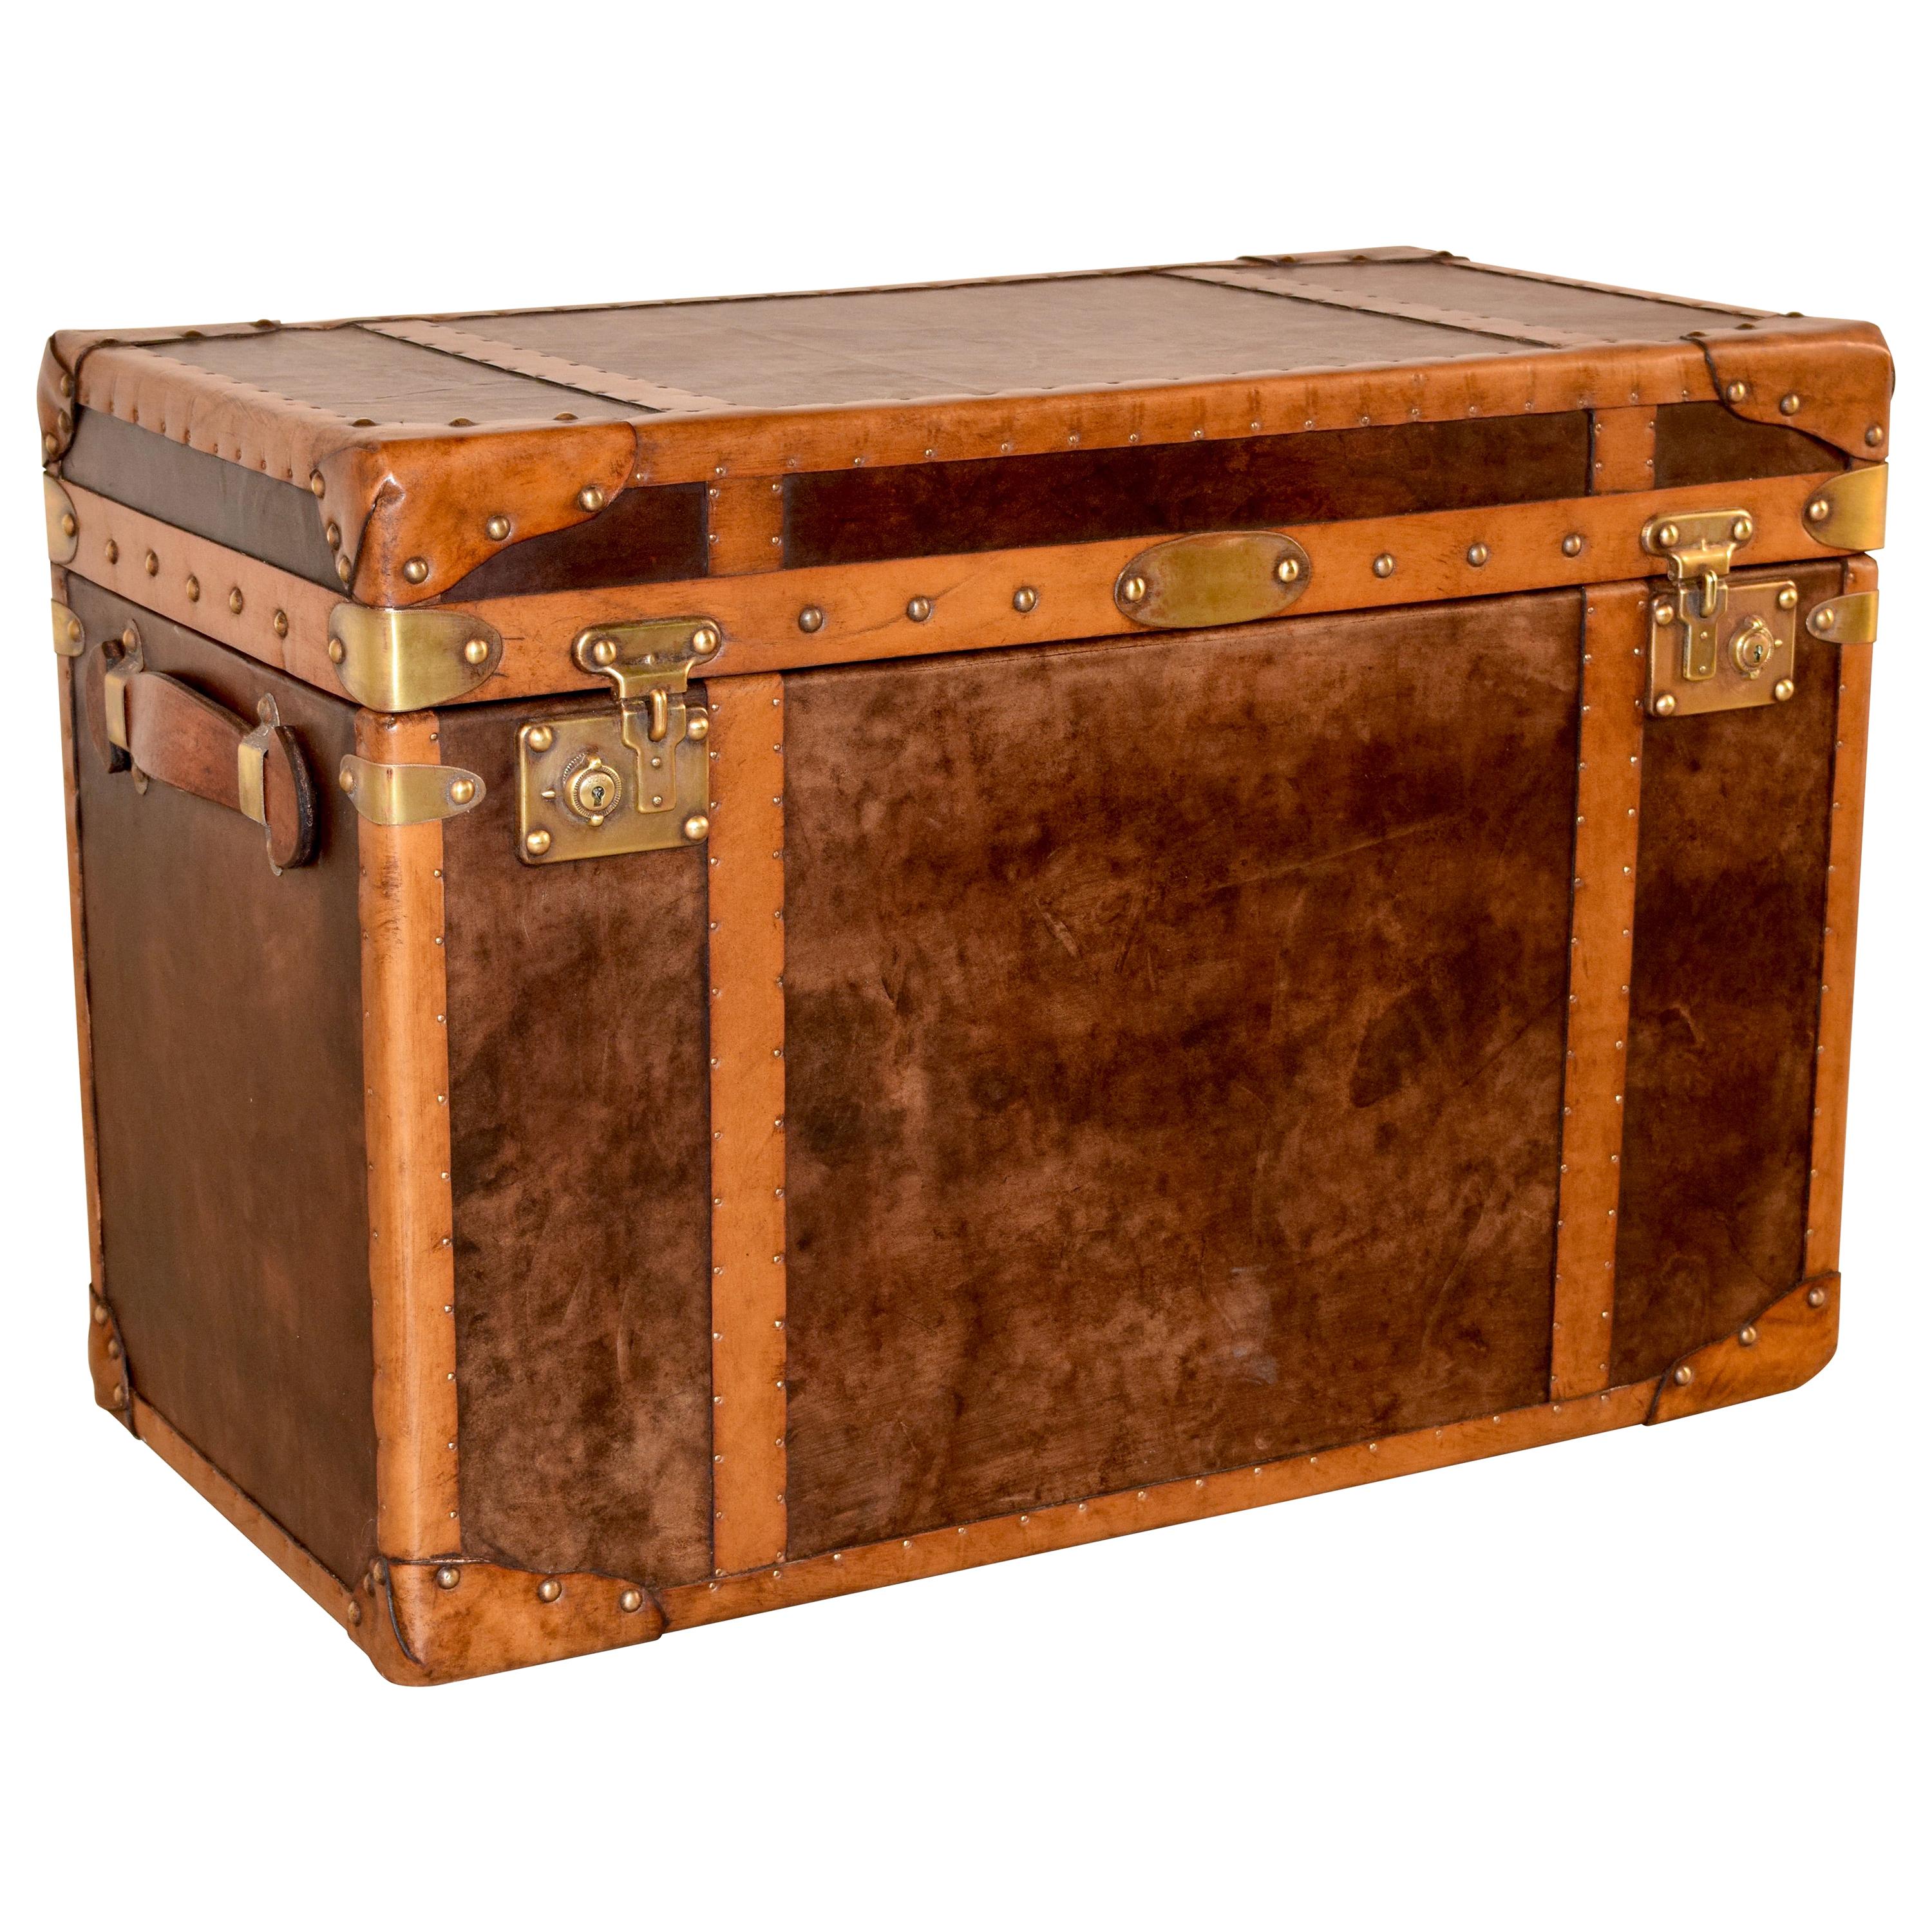 20th Century Refurbished Leather Steamer Trunk